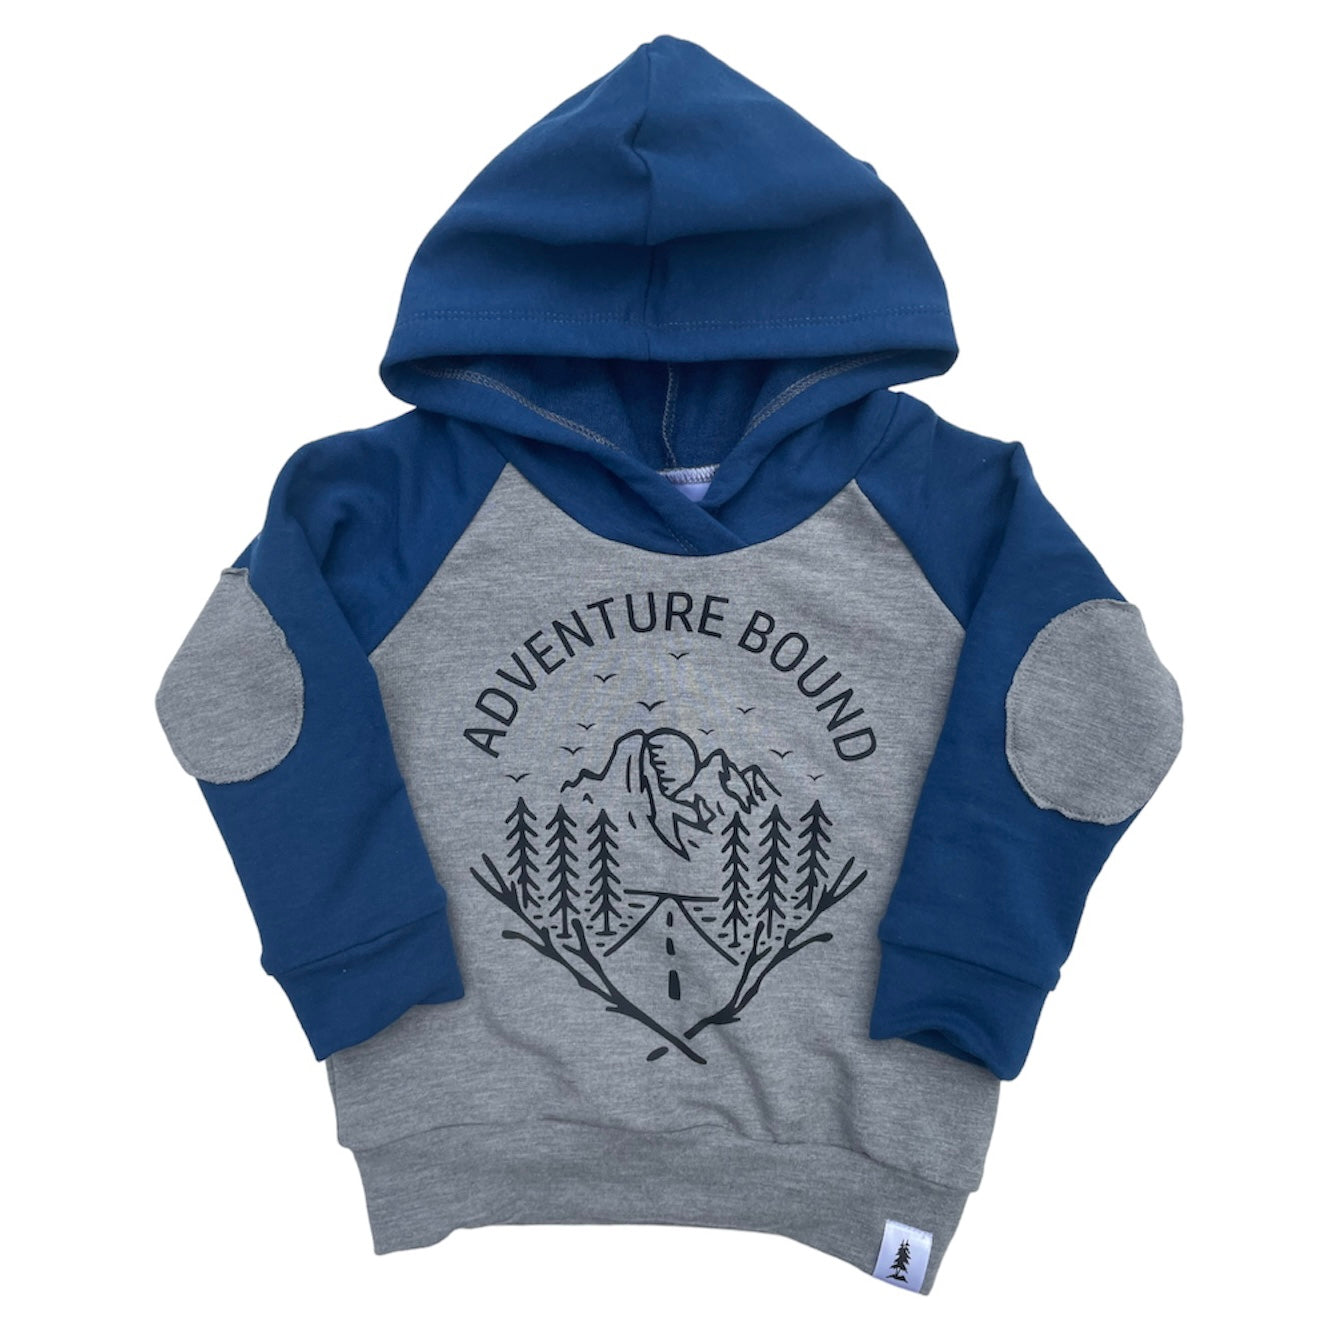 12-18 Month Bamboo Hoodies (various prints/colours)